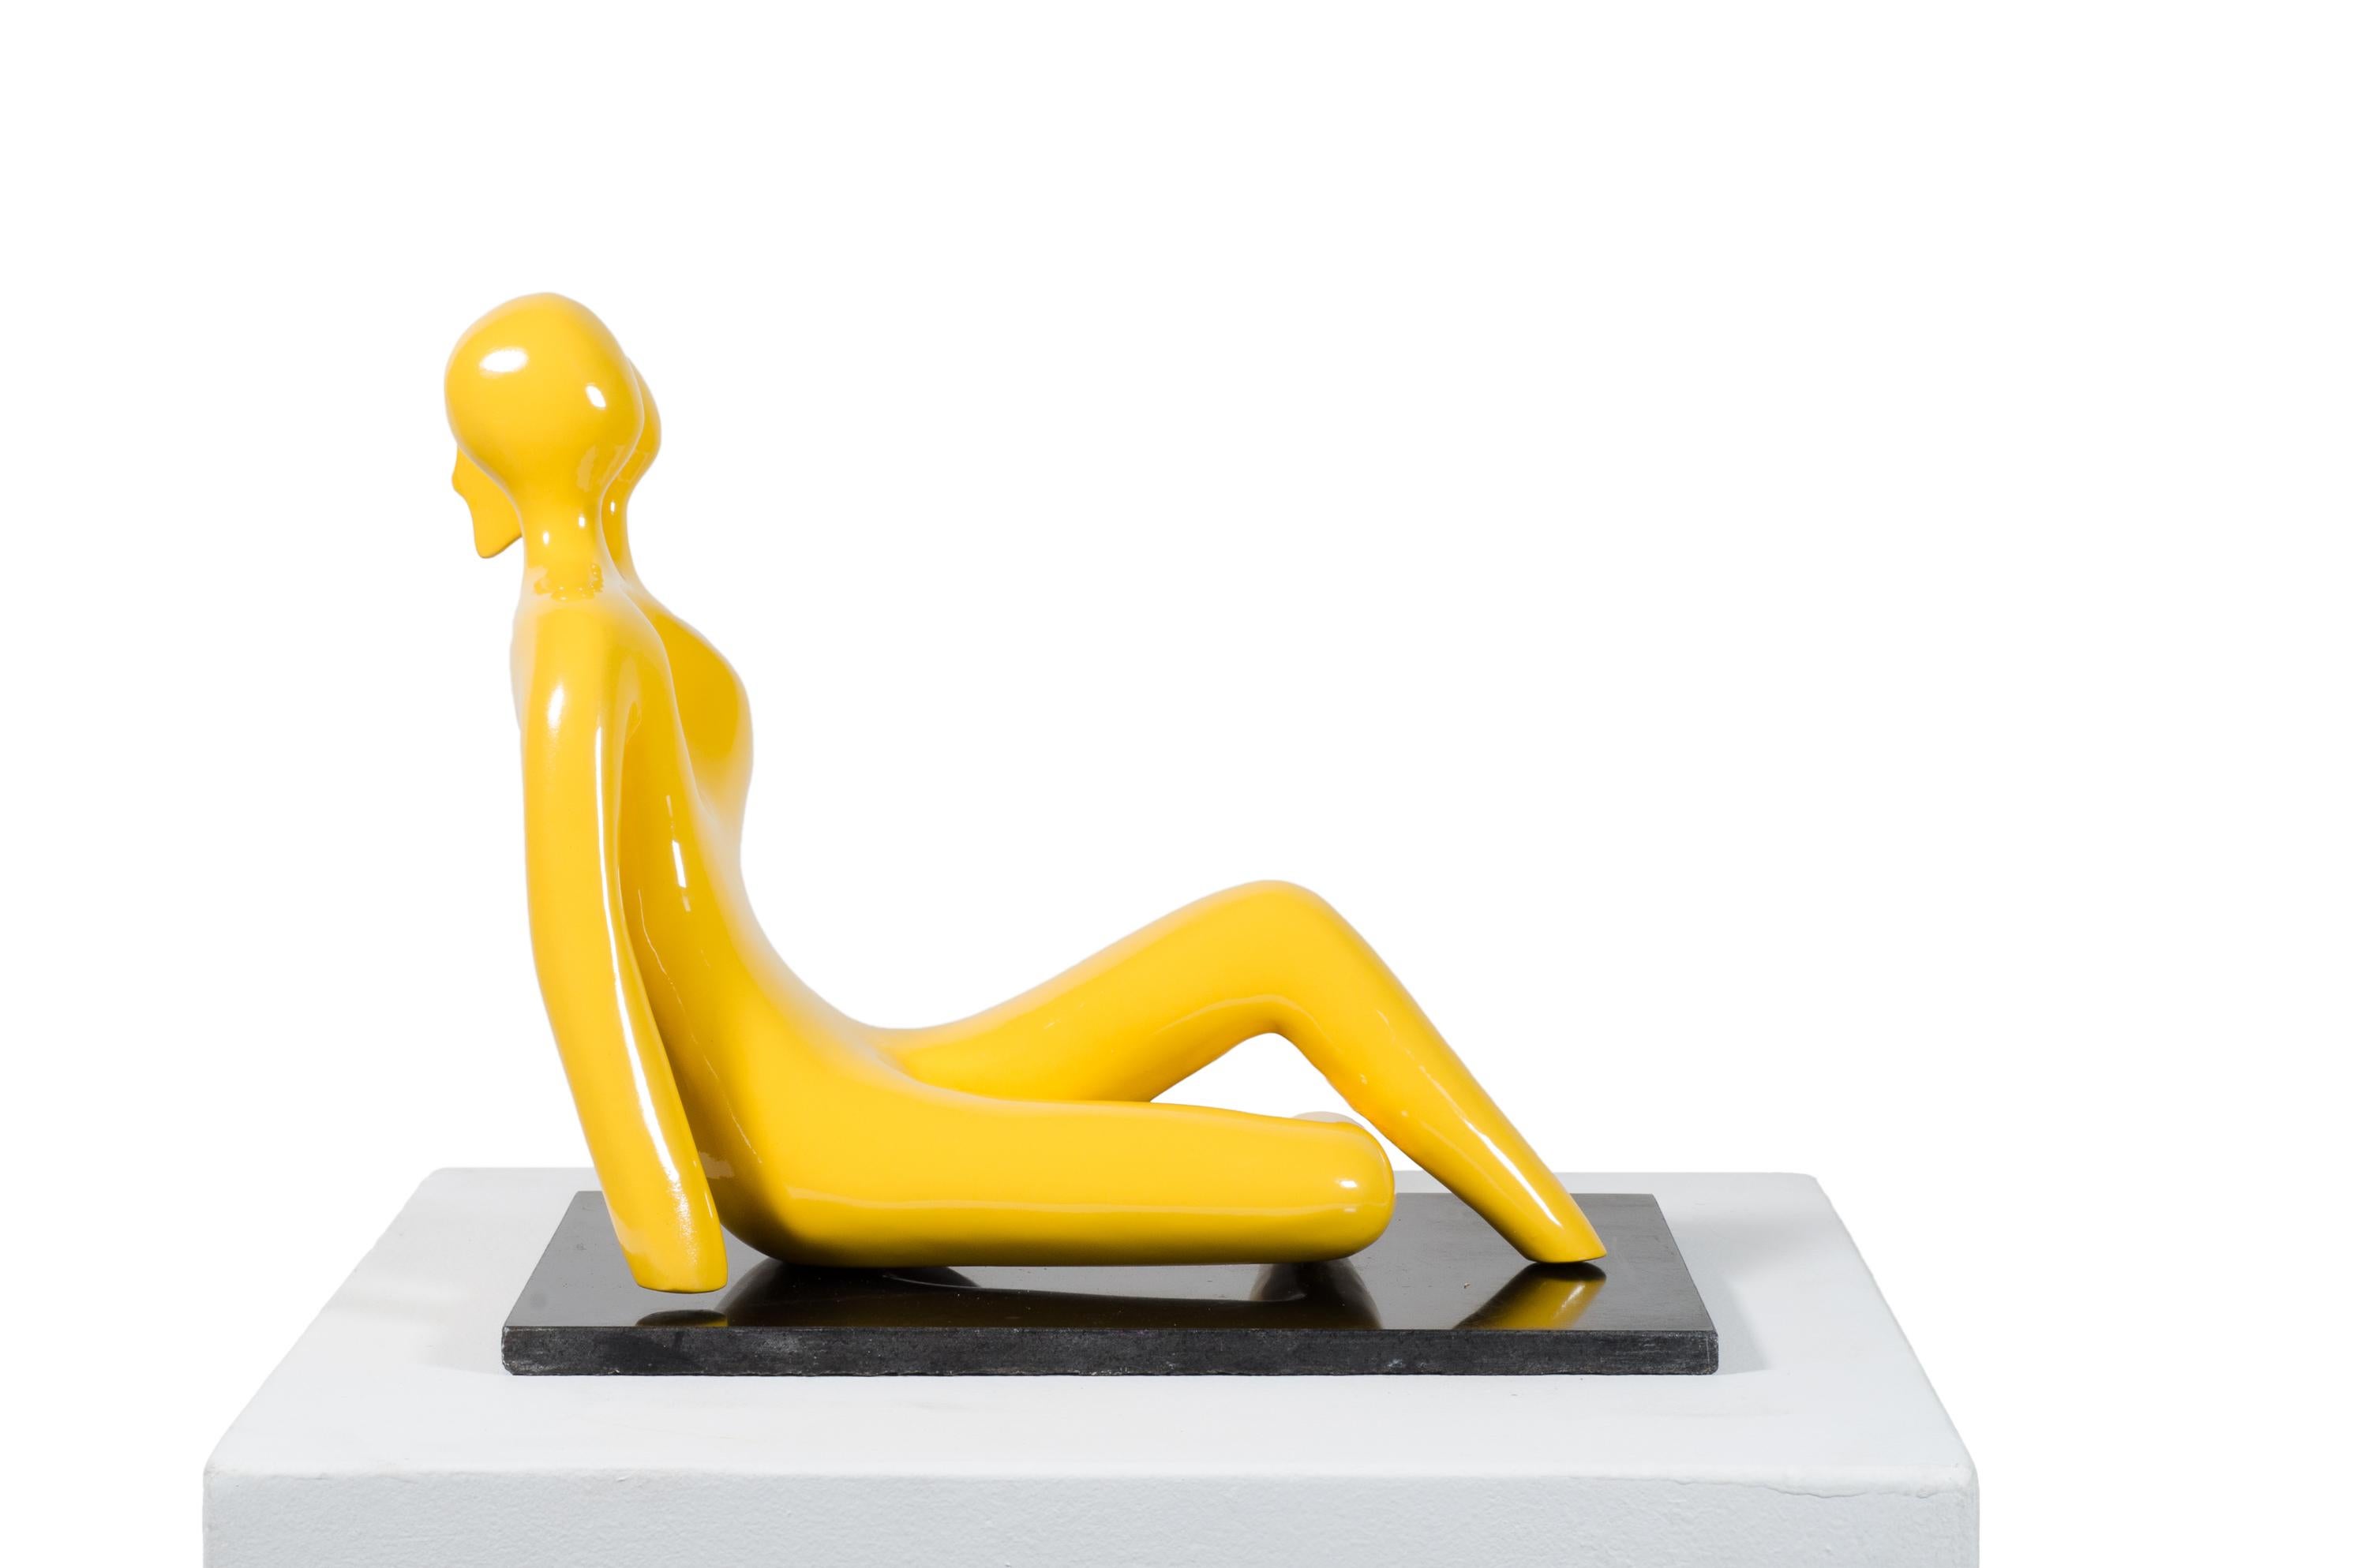 Soul Mates #2 (in yellow) When in love their souls and bodies fuse into just one - Contemporary Sculpture by Beatriz Gerenstein